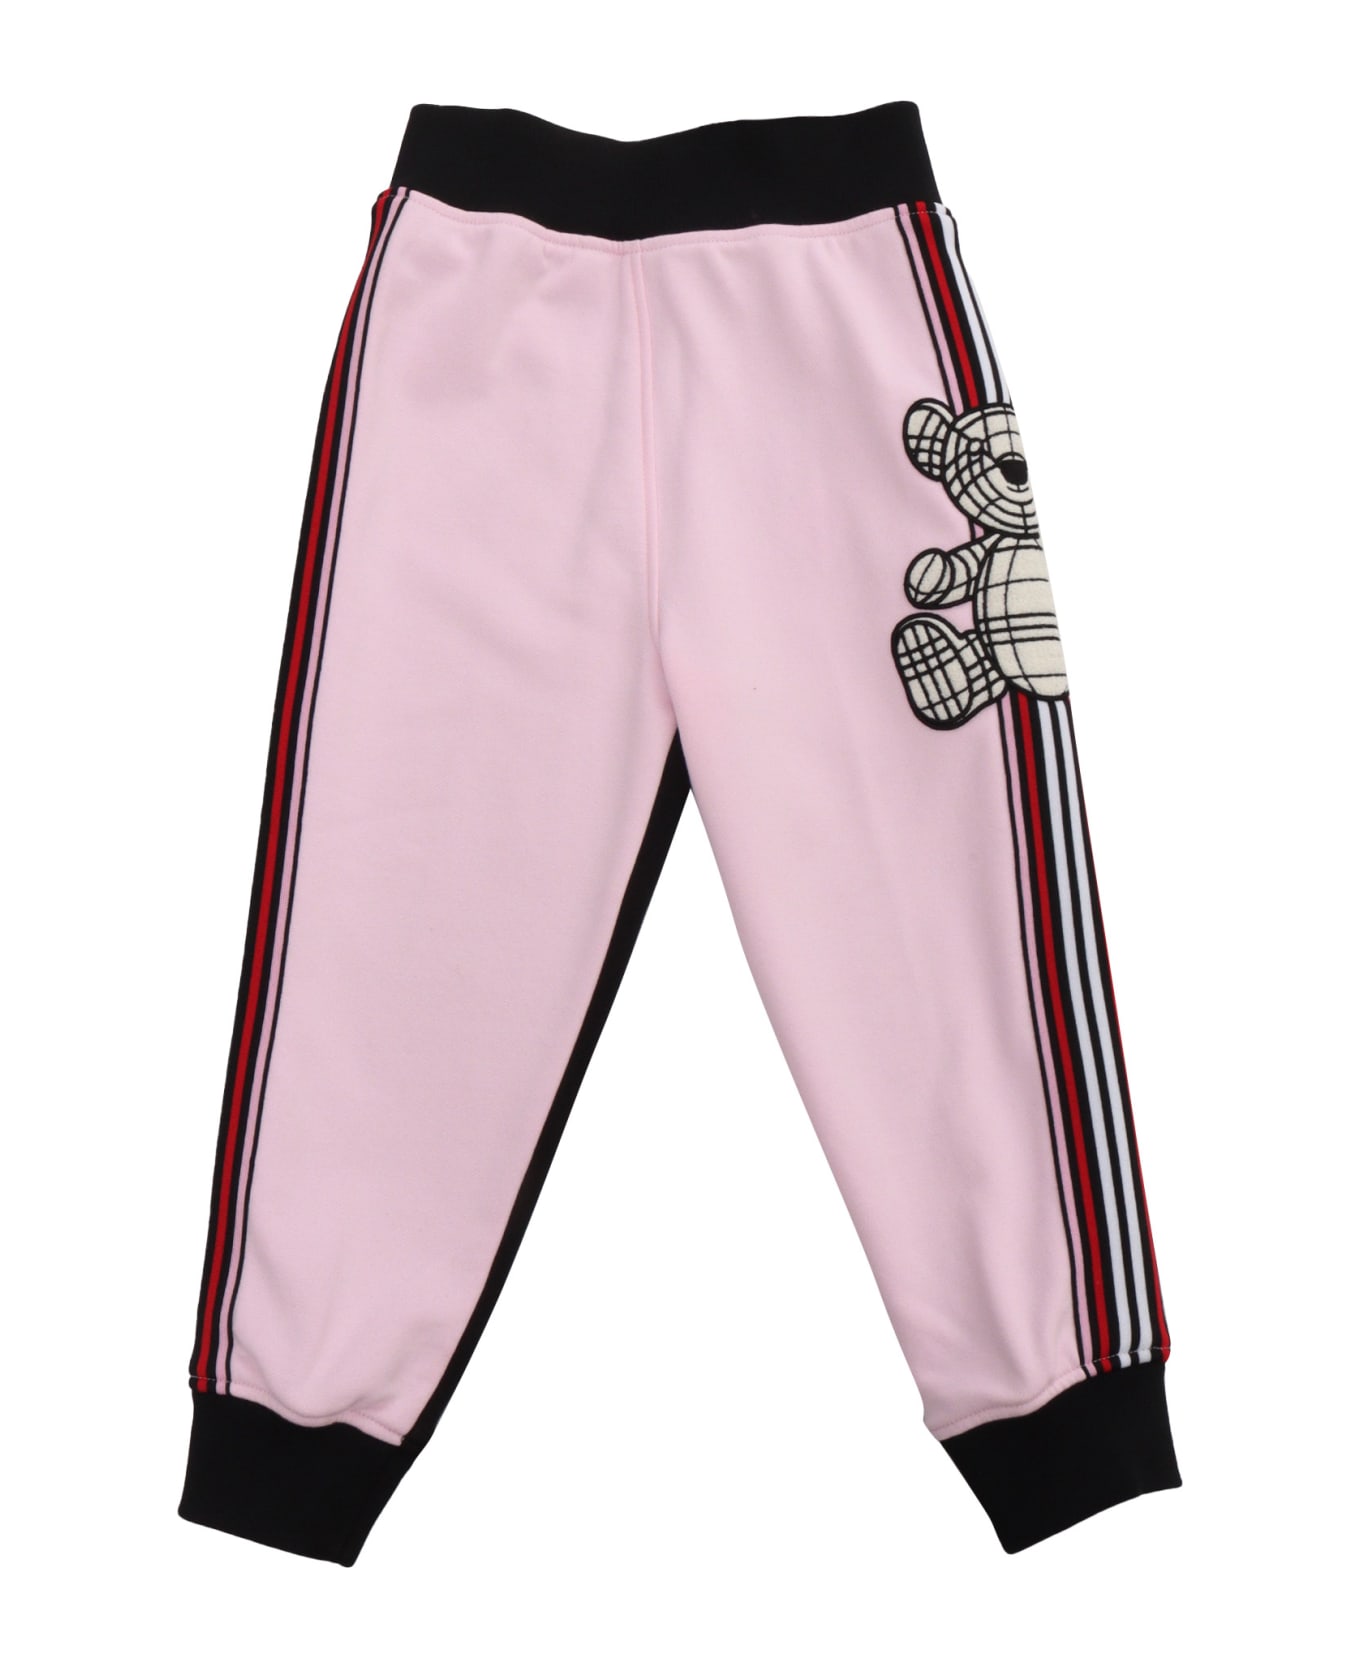 Burberry Pink Burberry Joggers - PINK